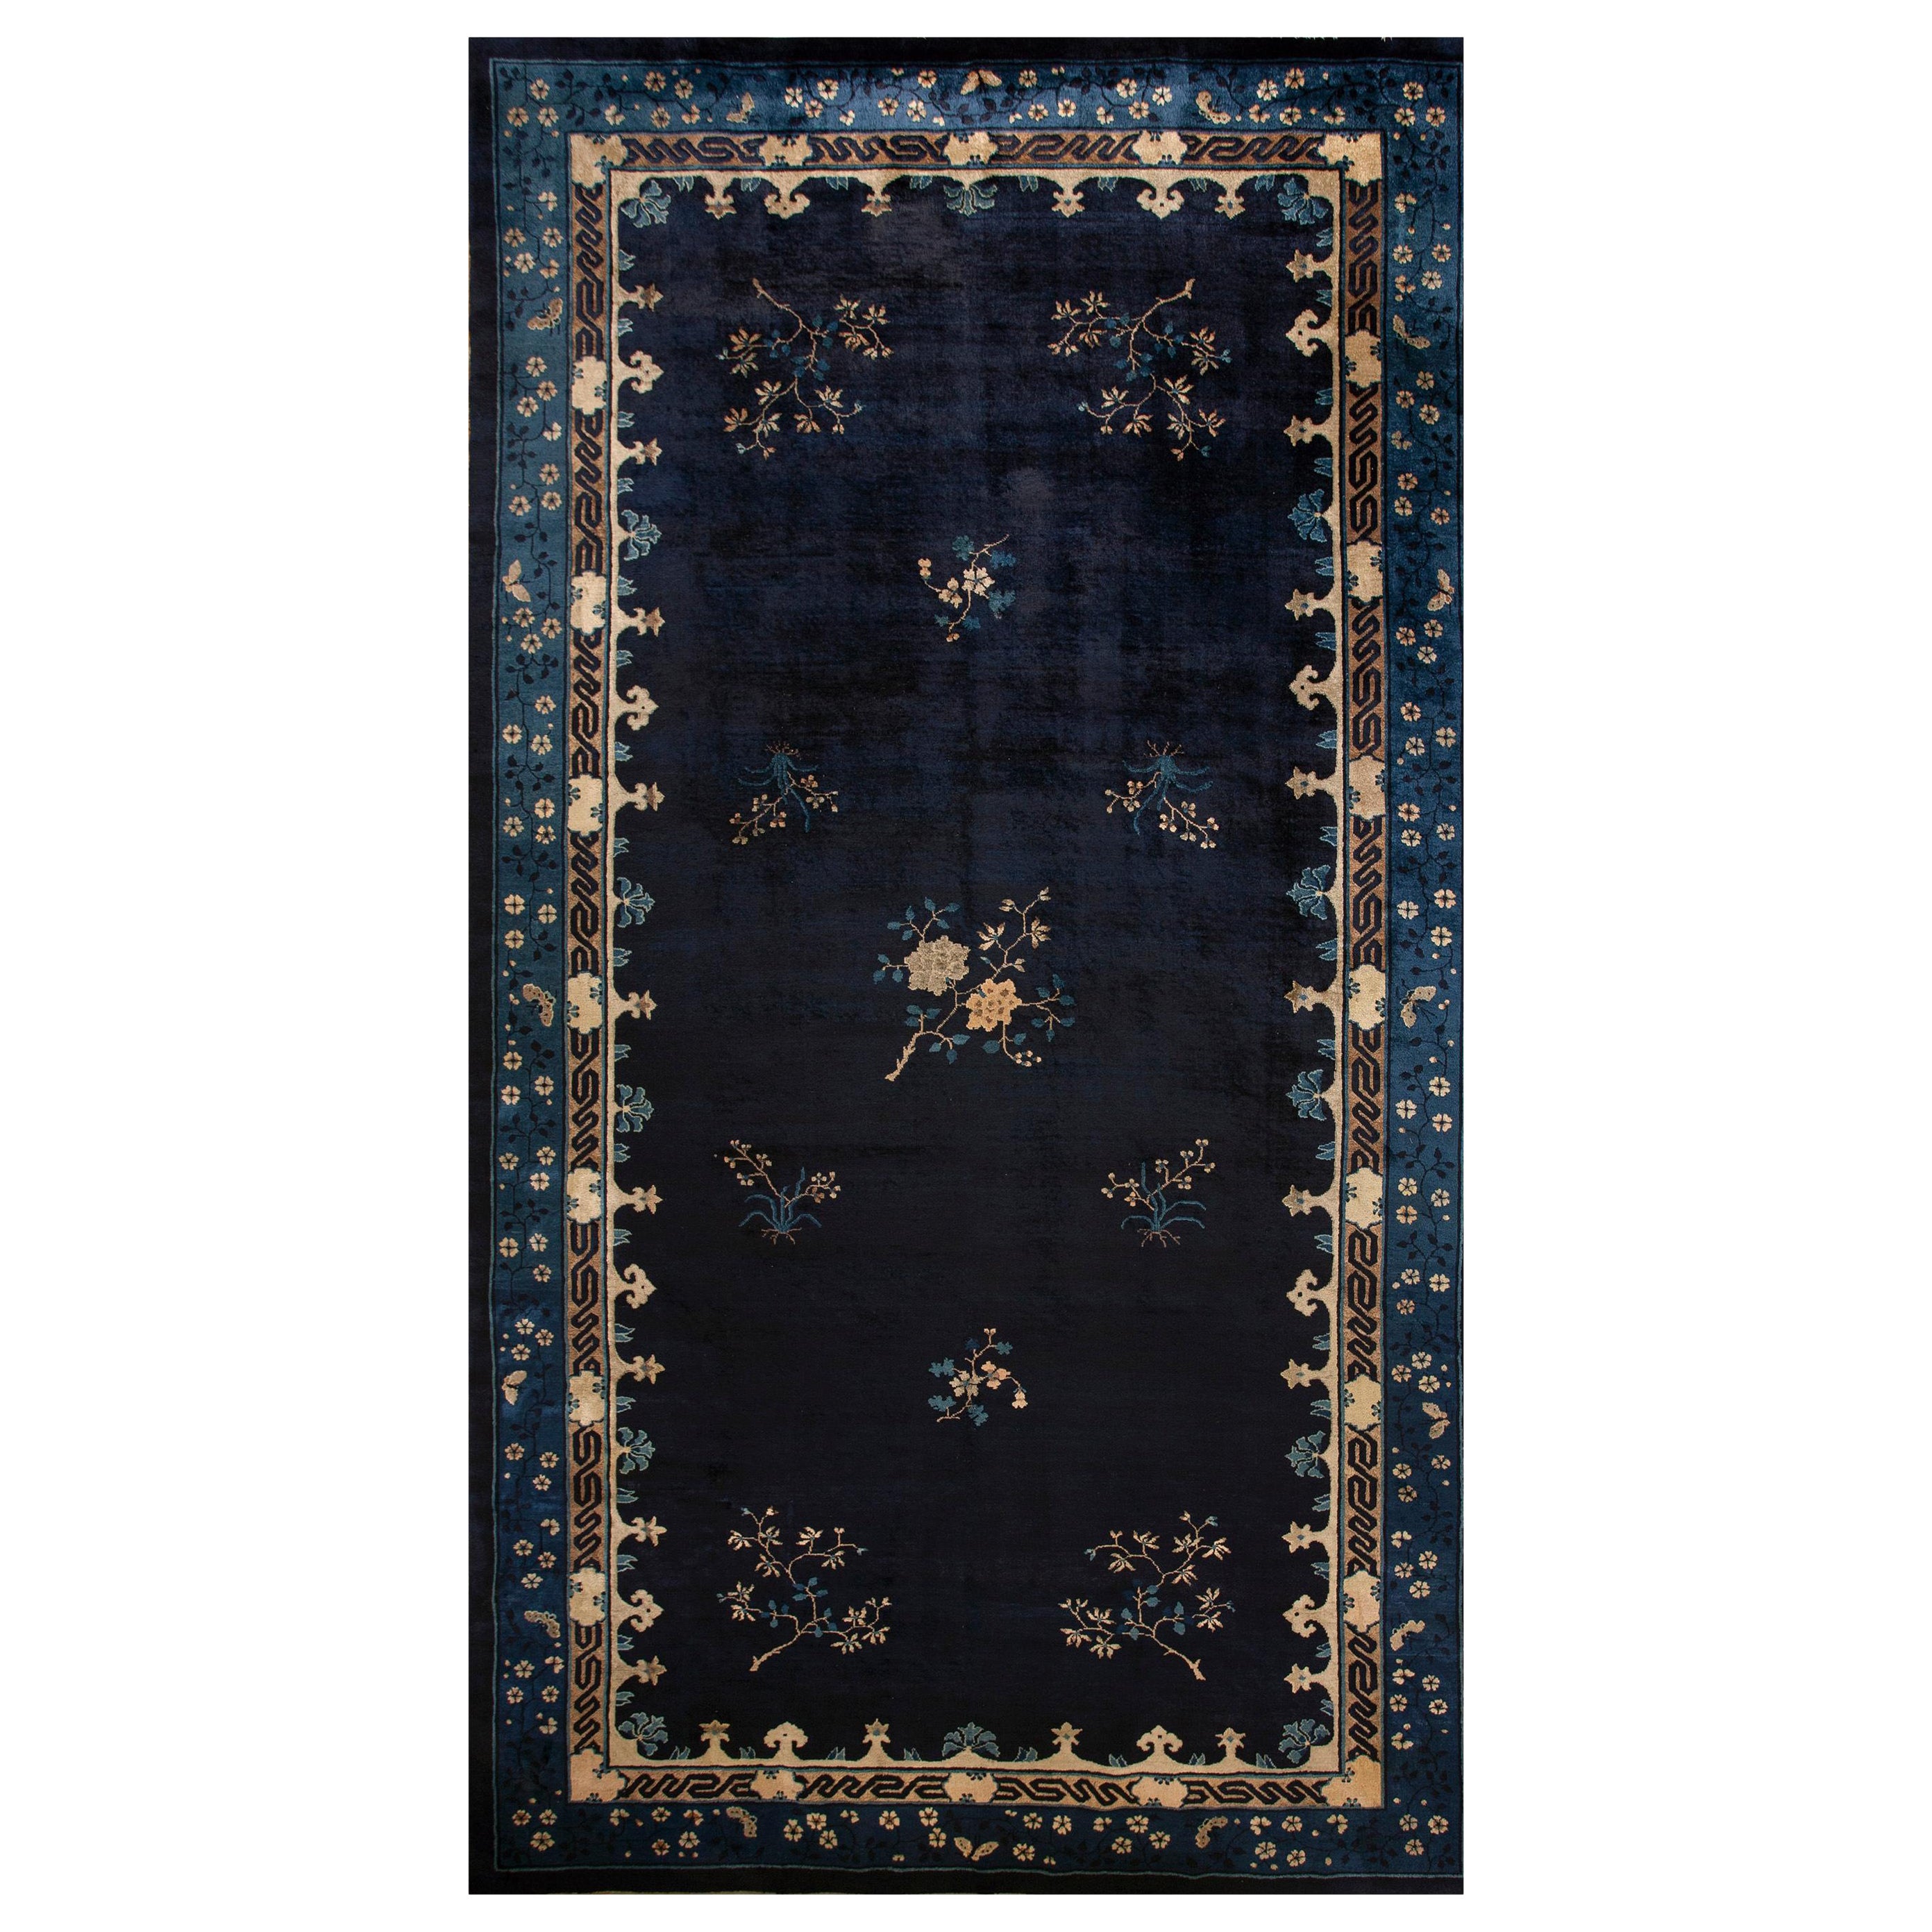 1920s  Chinese Peking Carpet ( 9'3" x 17'2" - 282 x 523 ) For Sale